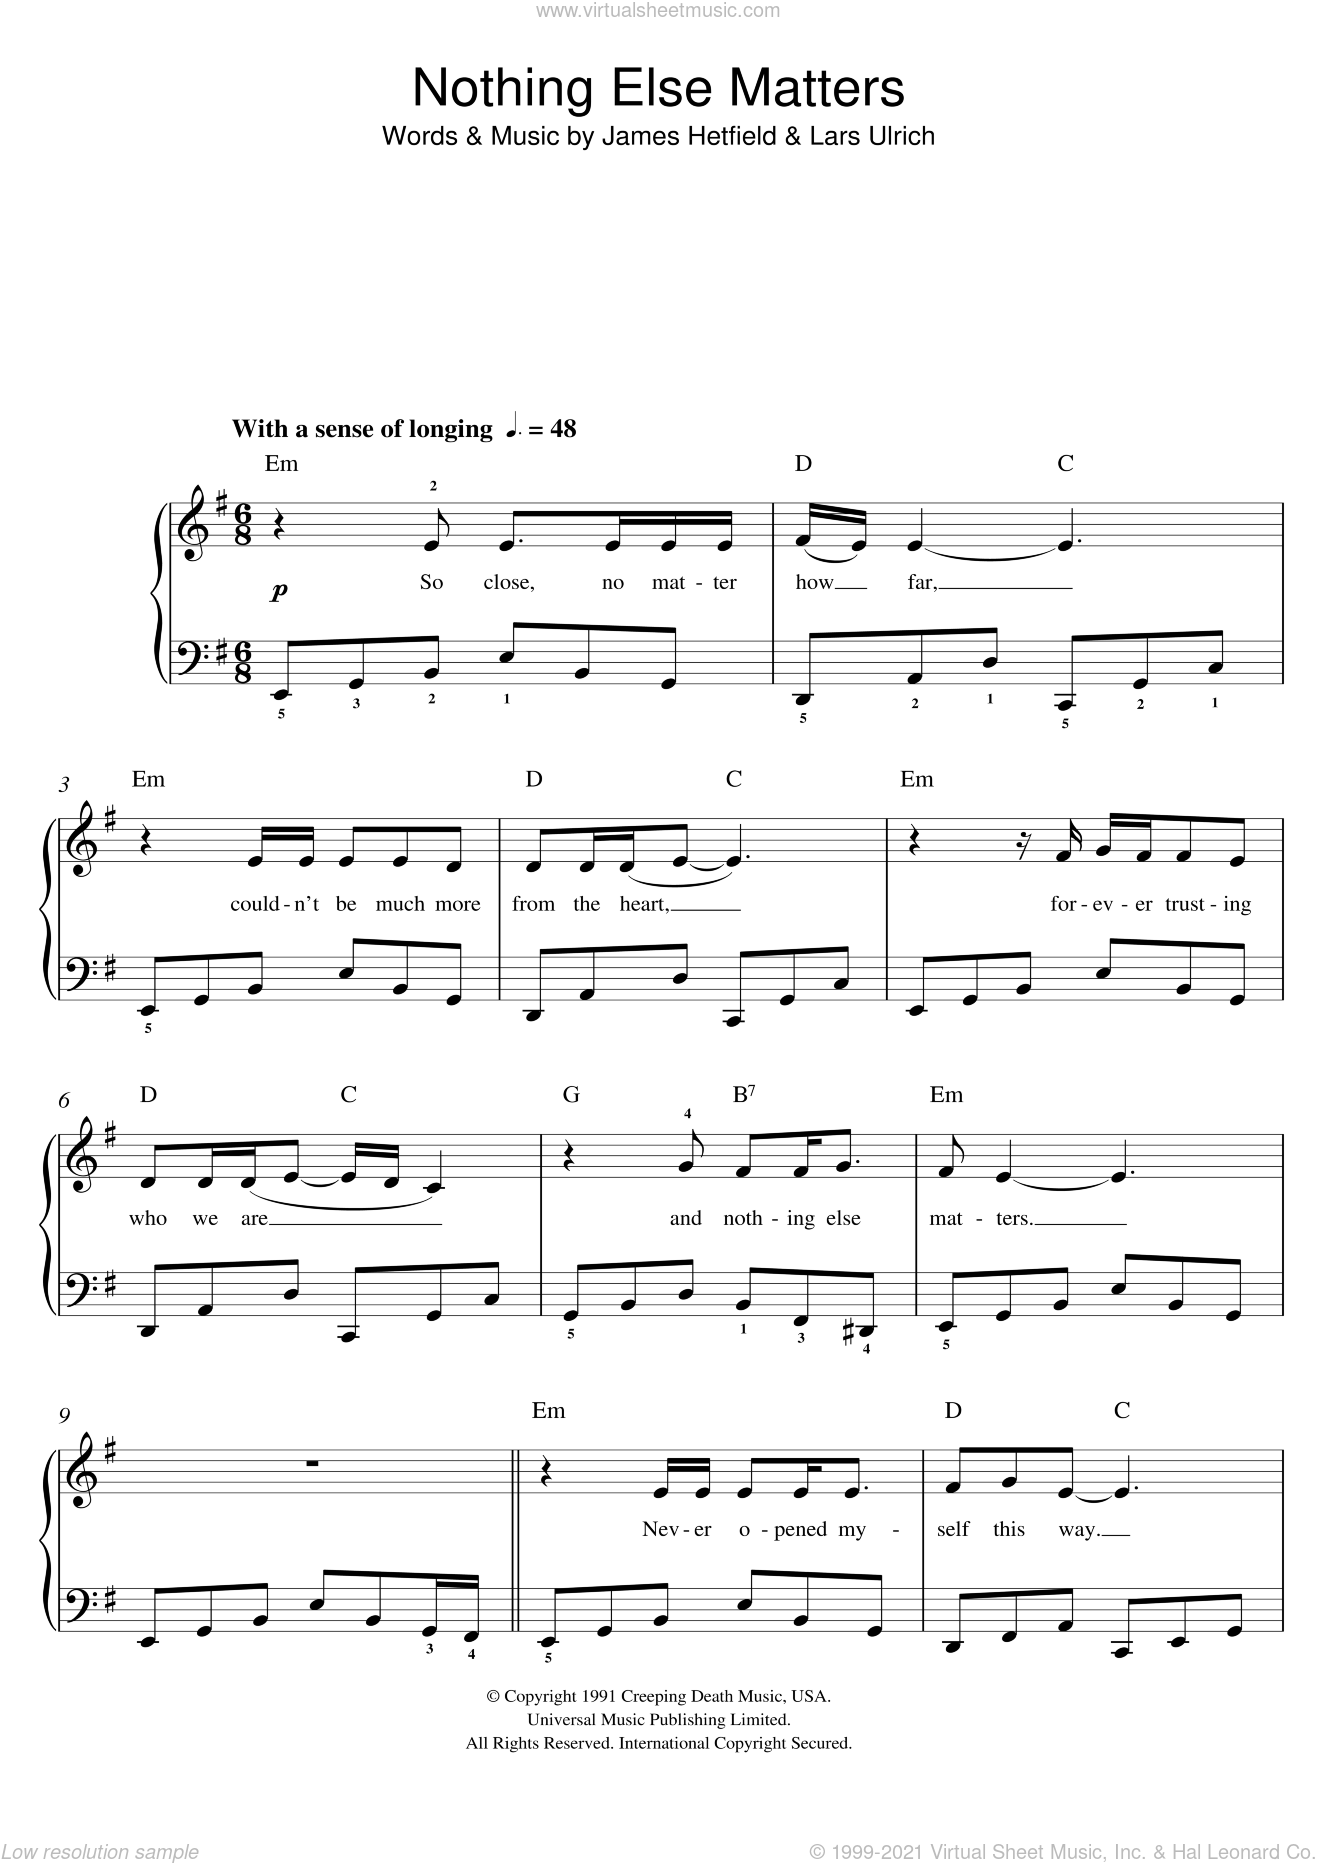 Metallica - Nothing Else Matters sheet music for piano ...